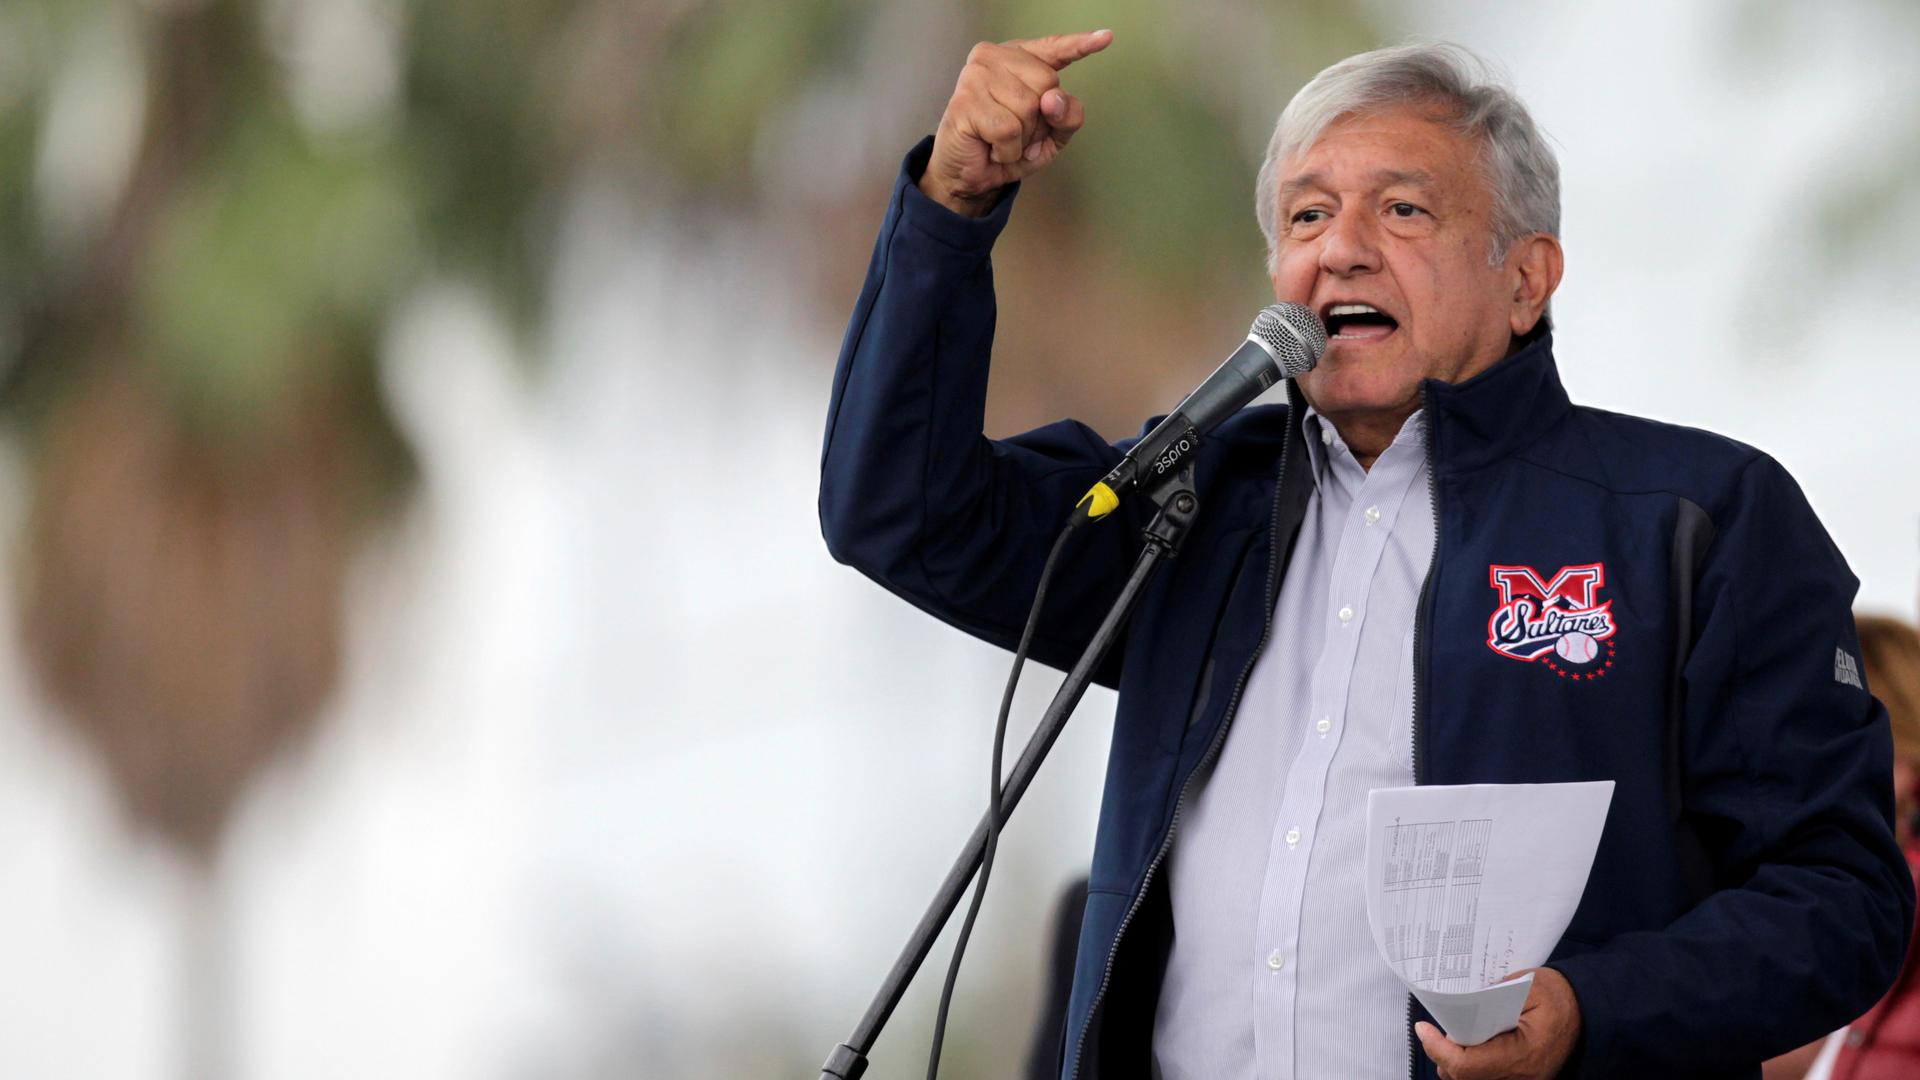 Mexico's President-elect Andres Manuel Lopez Obrador waves to a crowd